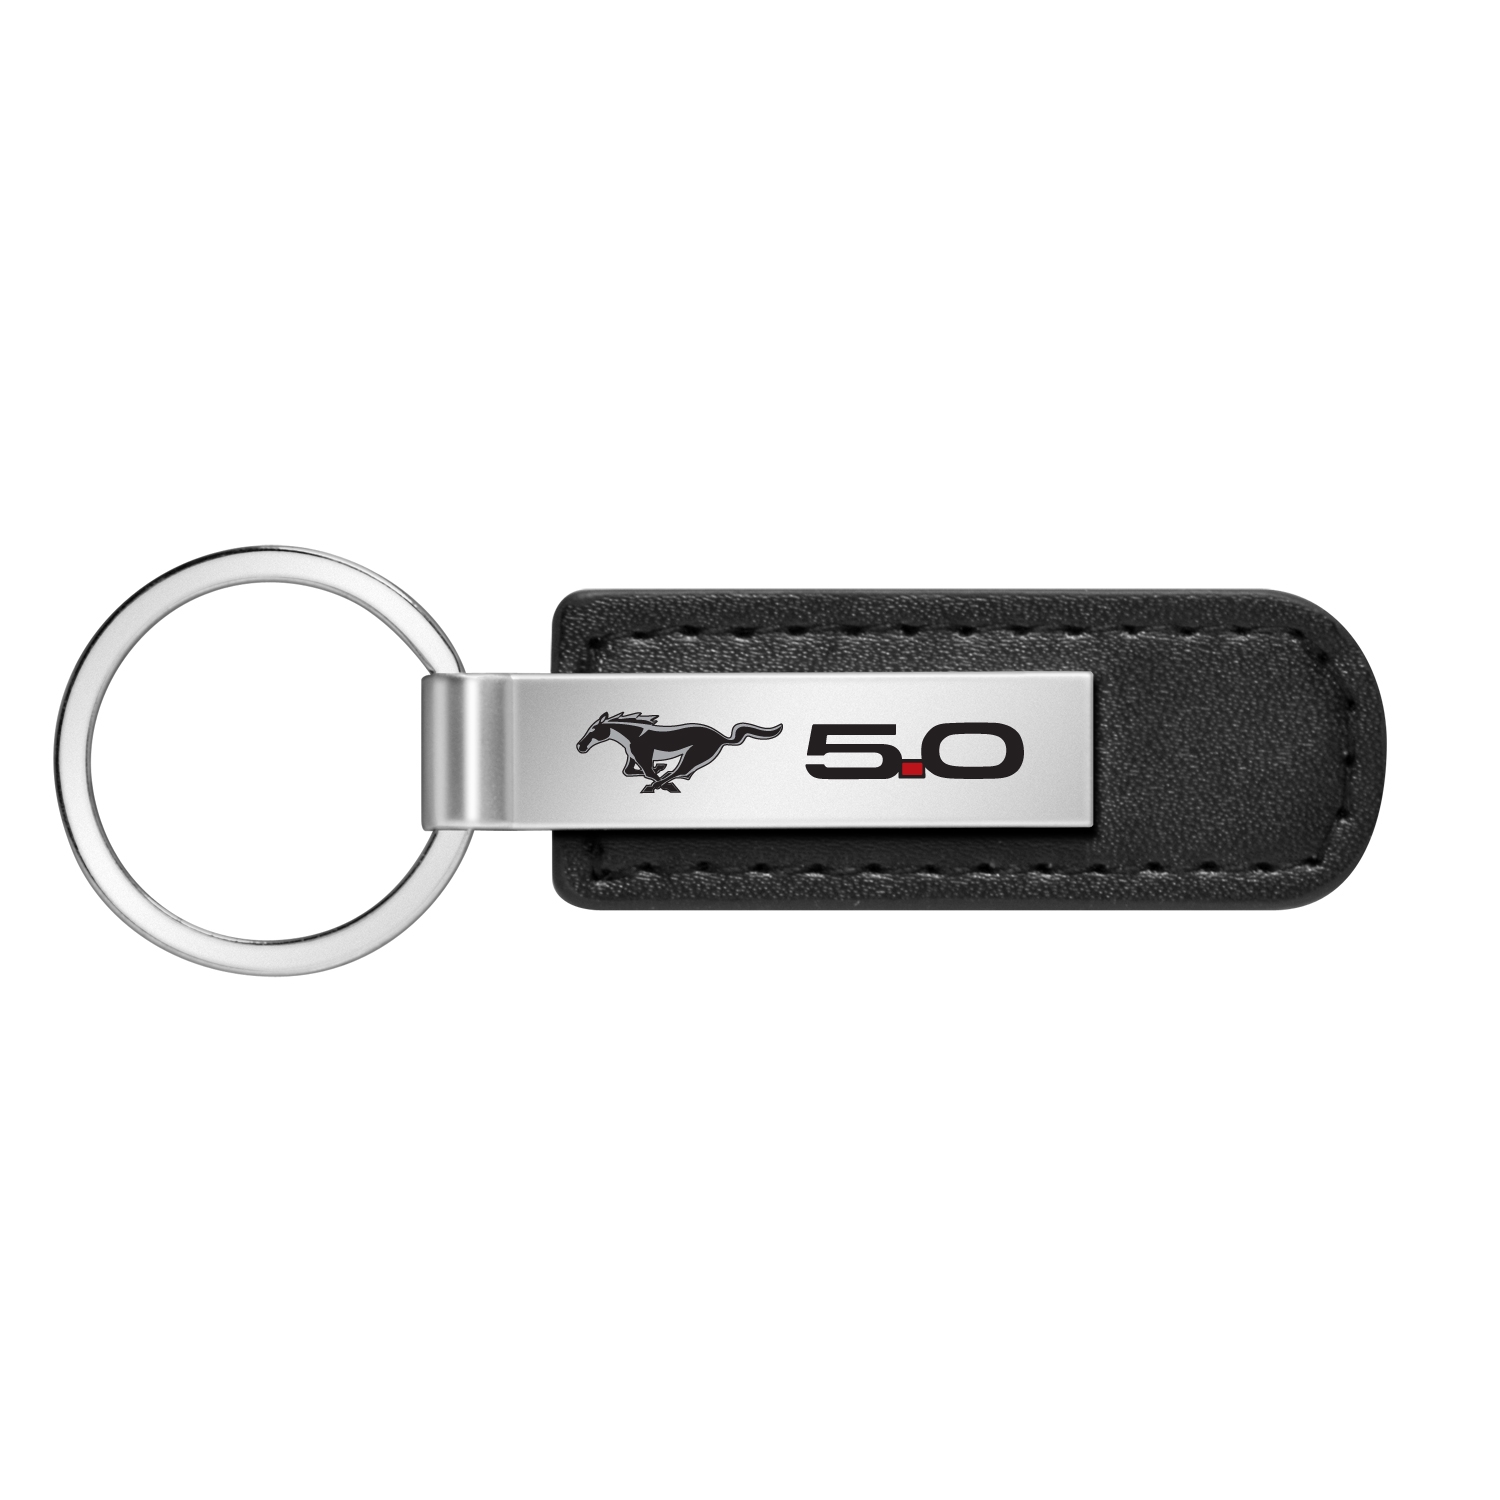 Ford Mustang GT 5.0 Black Leather Strap Key Chain